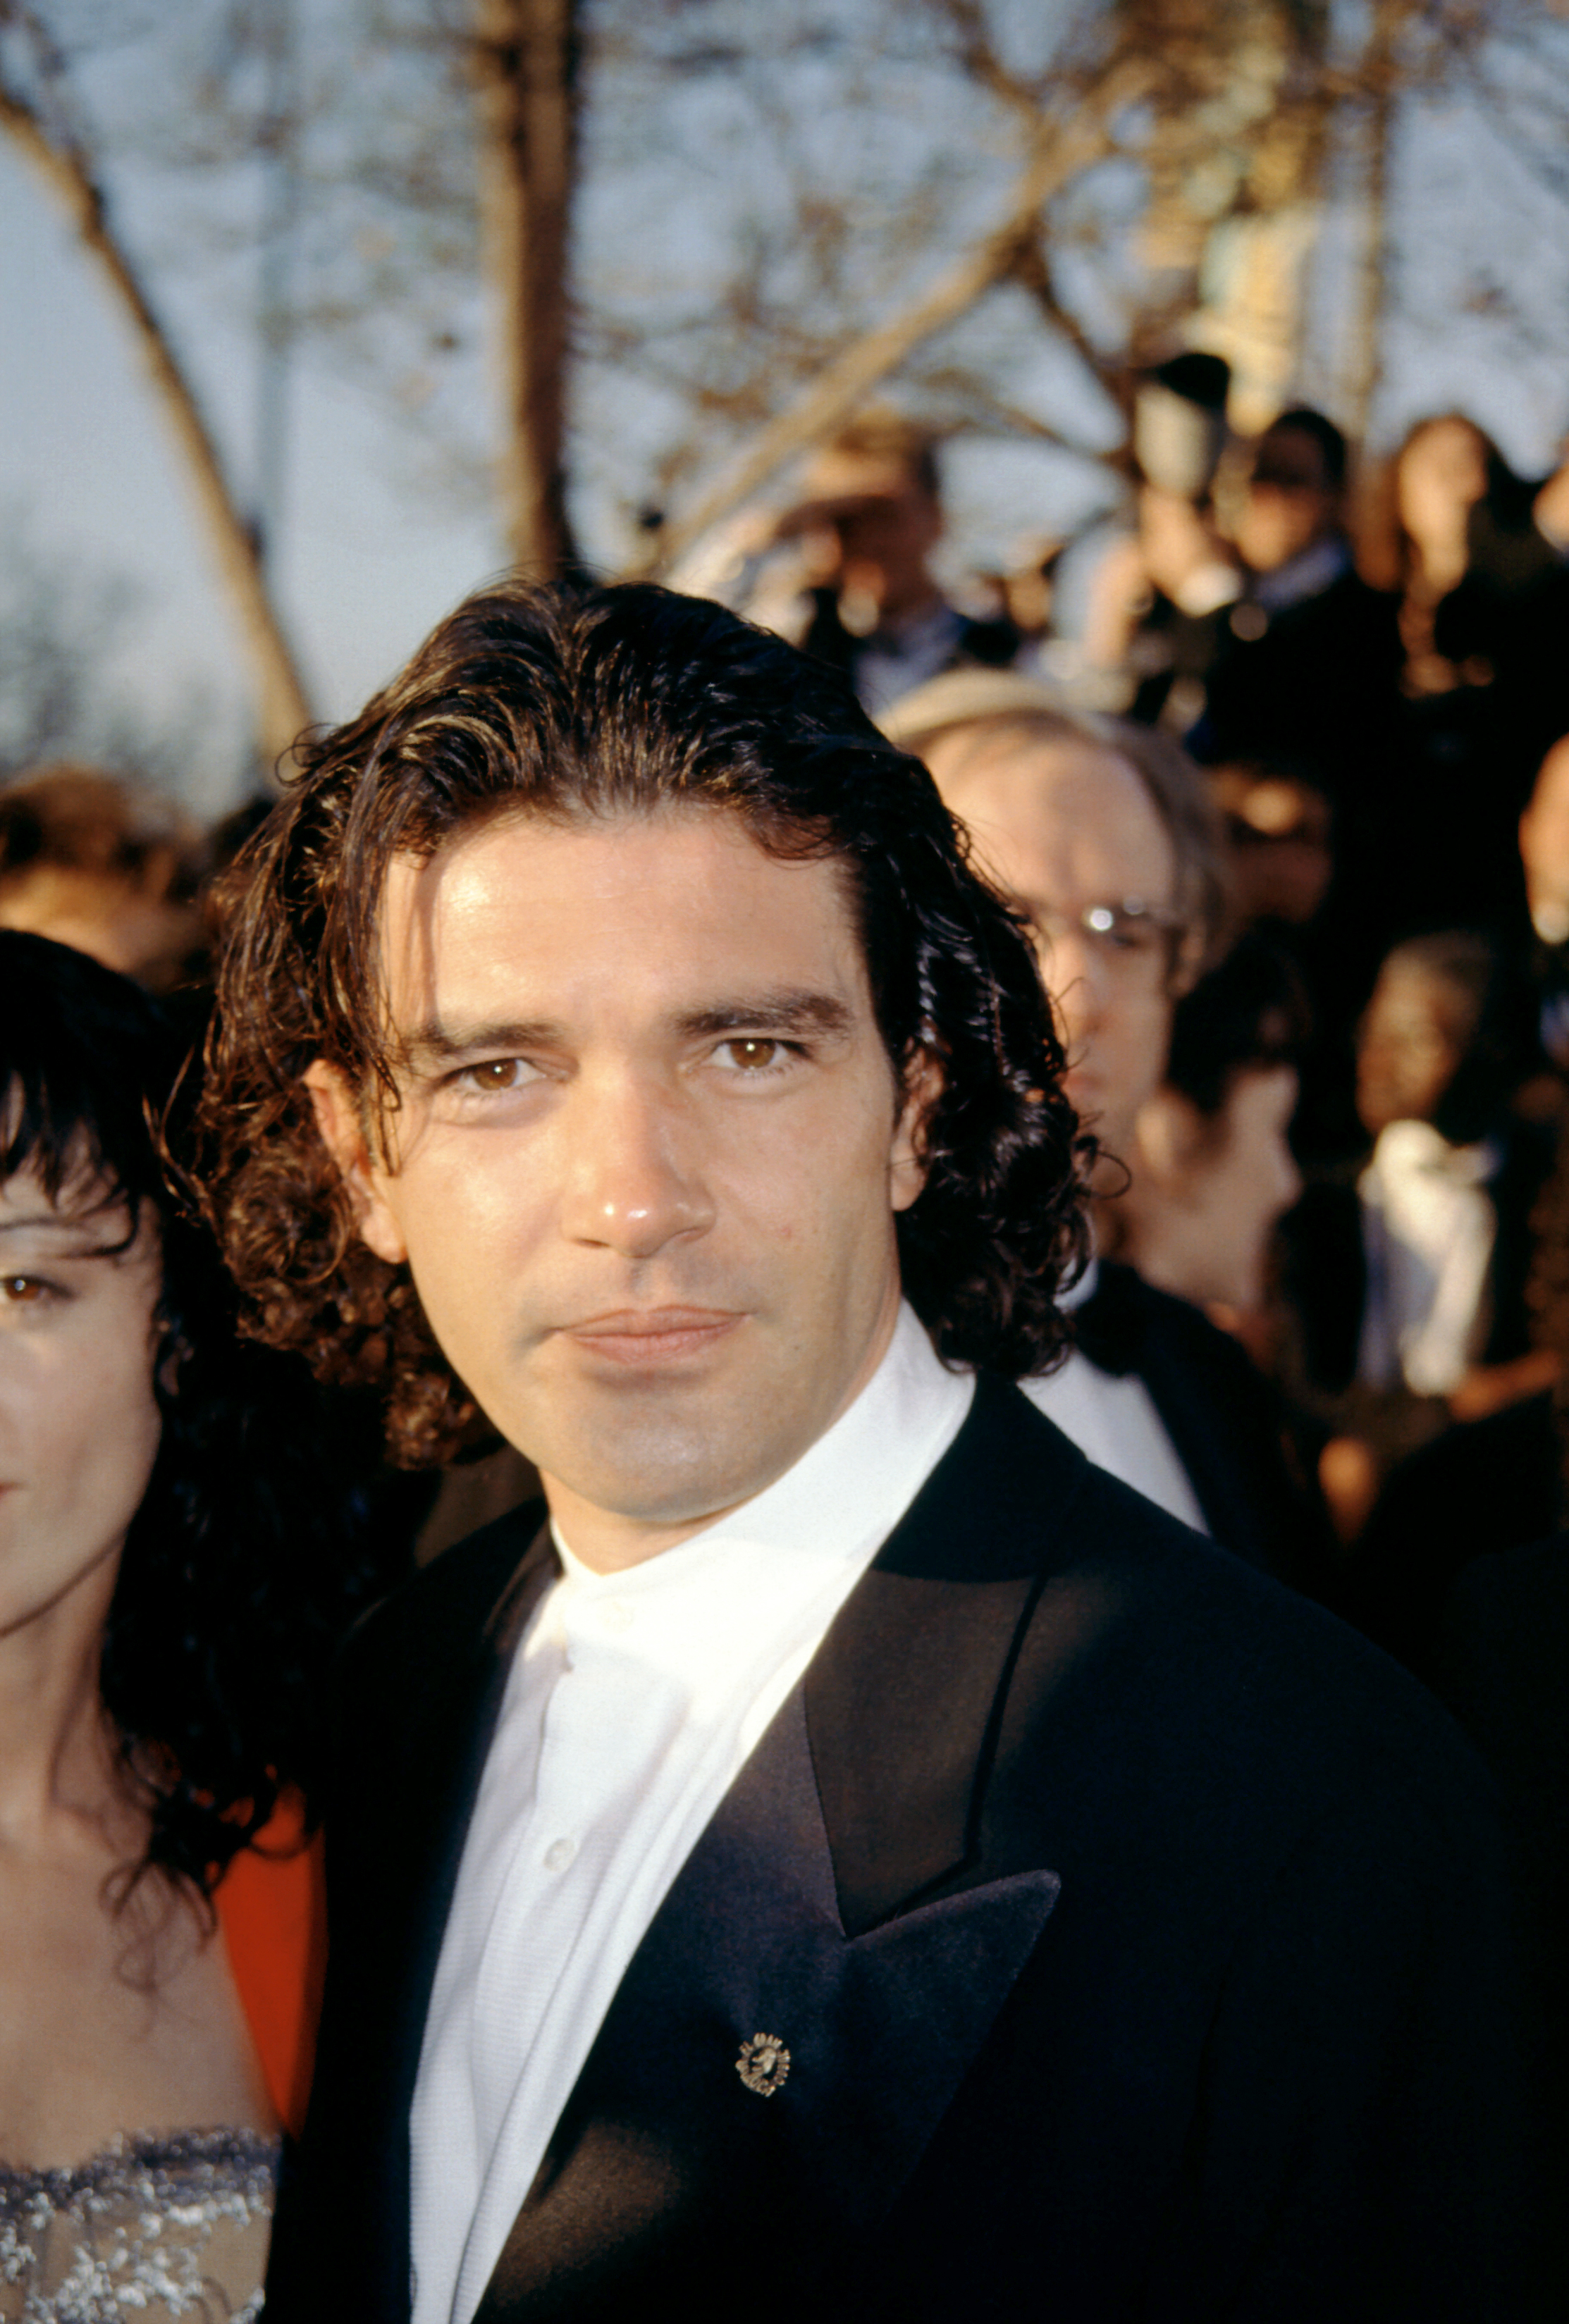 Antonio Banderas joins the 66th Annual Academy Awards on March 21, 1994 in Los Angeles, California | Source: Getty Images